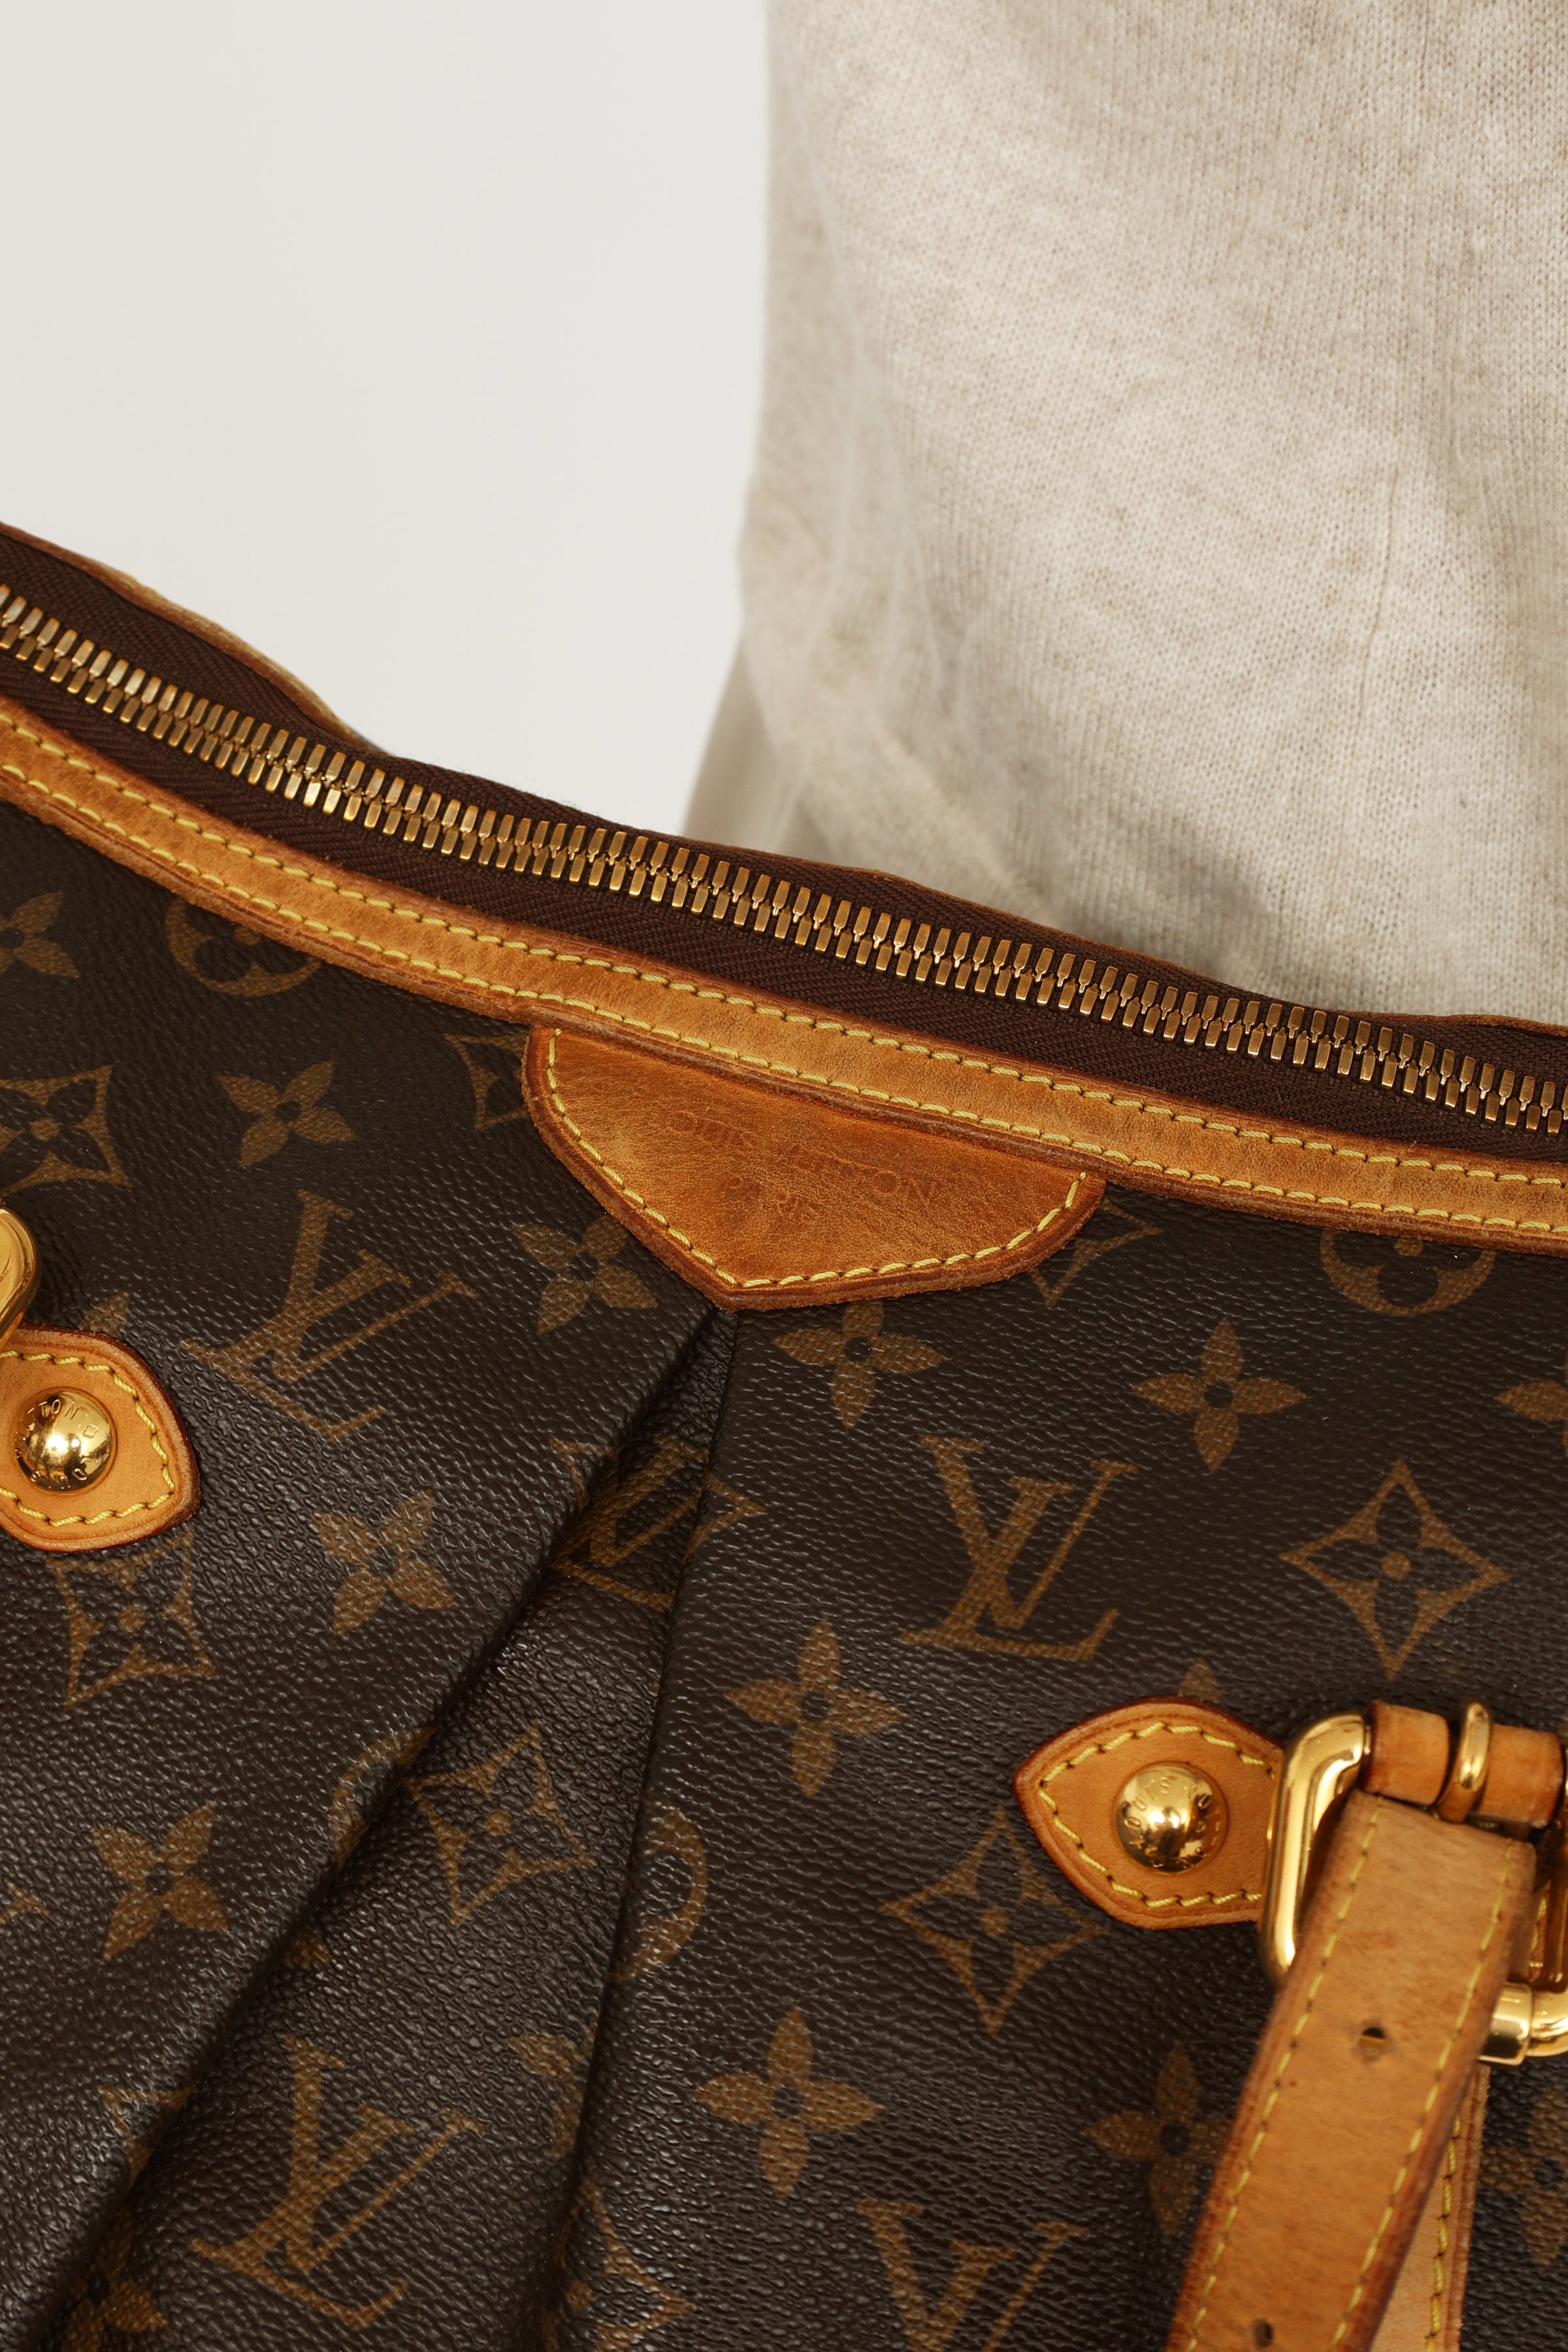 Louis Vuitton Palermo Shoulder Bags for Women for sale, Shop with Afterpay